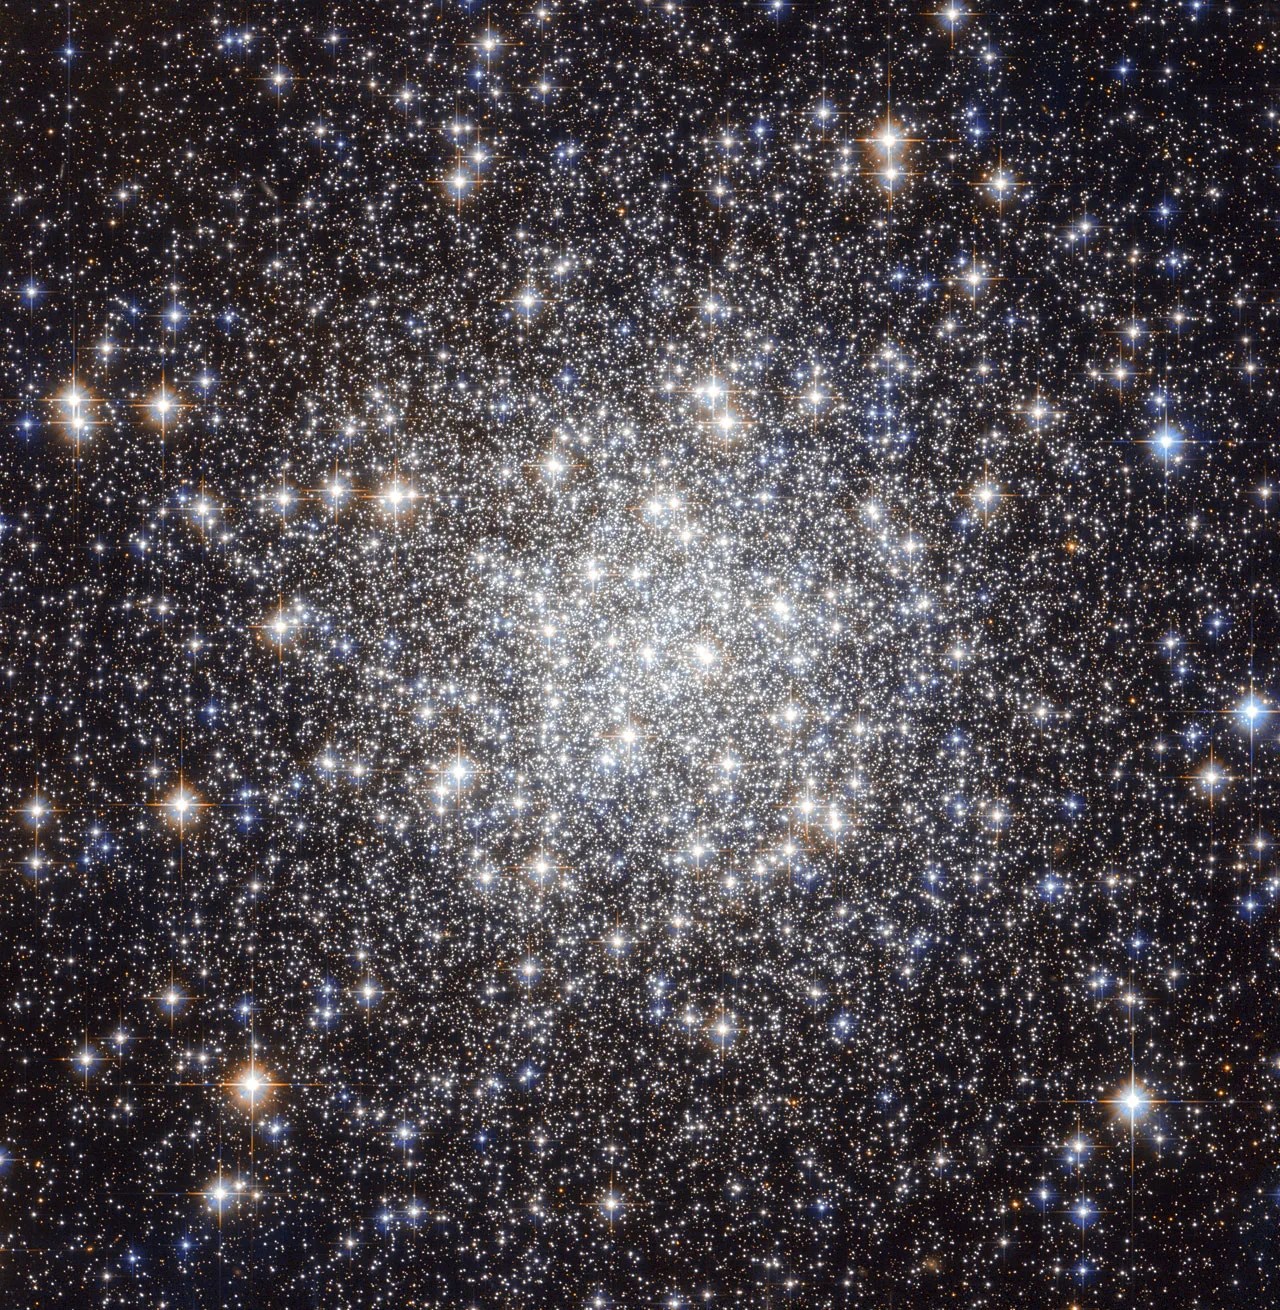 standard globular cluster: dense stars in the center, tapering out to darker space with a few bright ones sprinkled about